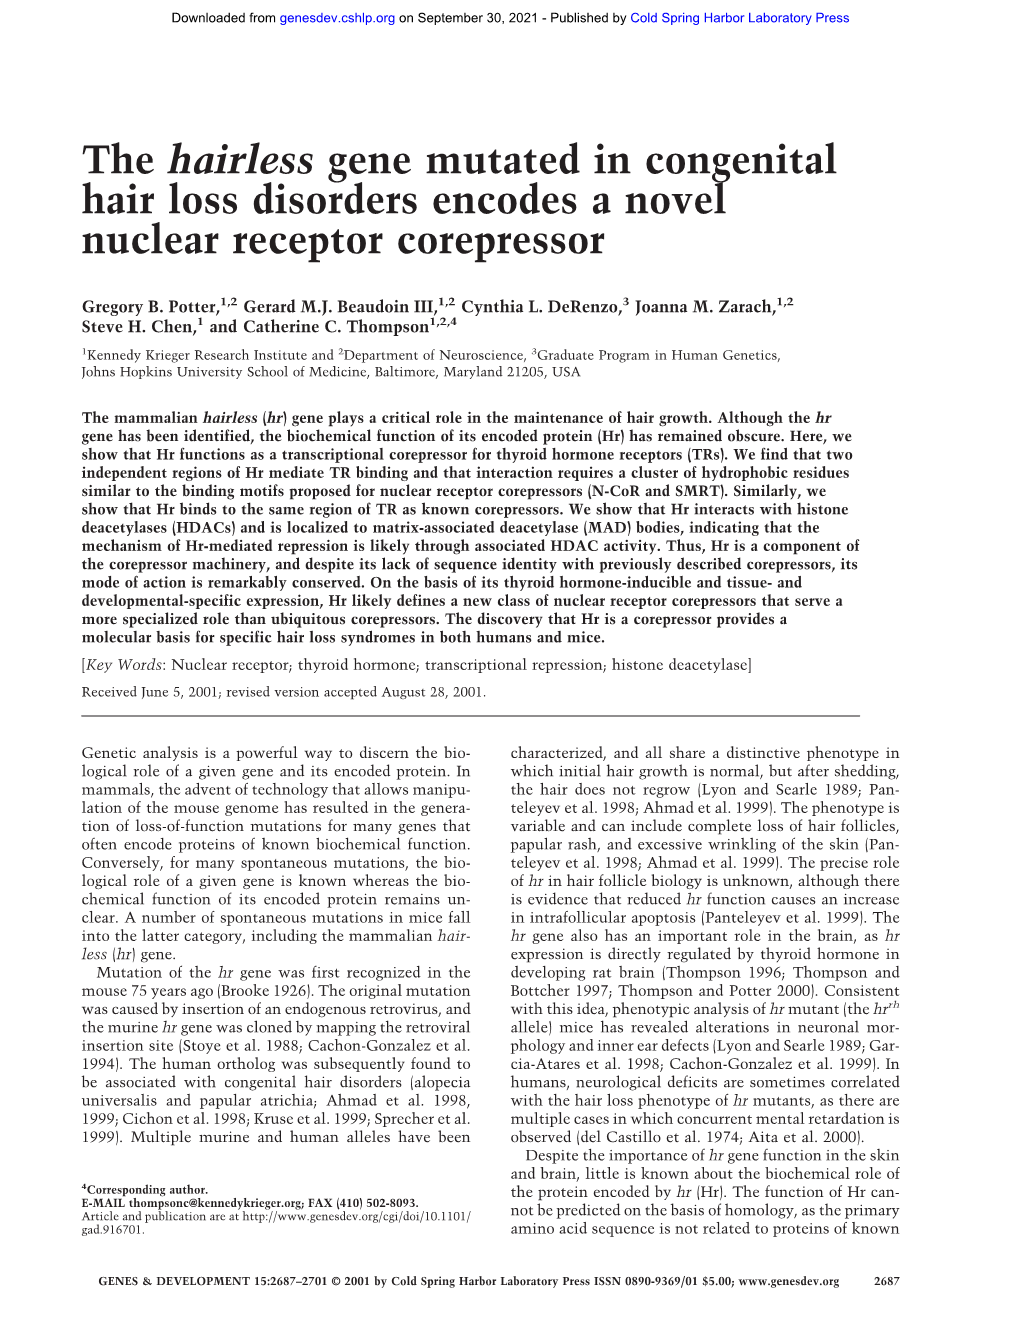 The Hairless Gene Mutated in Congenital Hair Loss Disorders Encodes a Novel Nuclear Receptor Corepressor